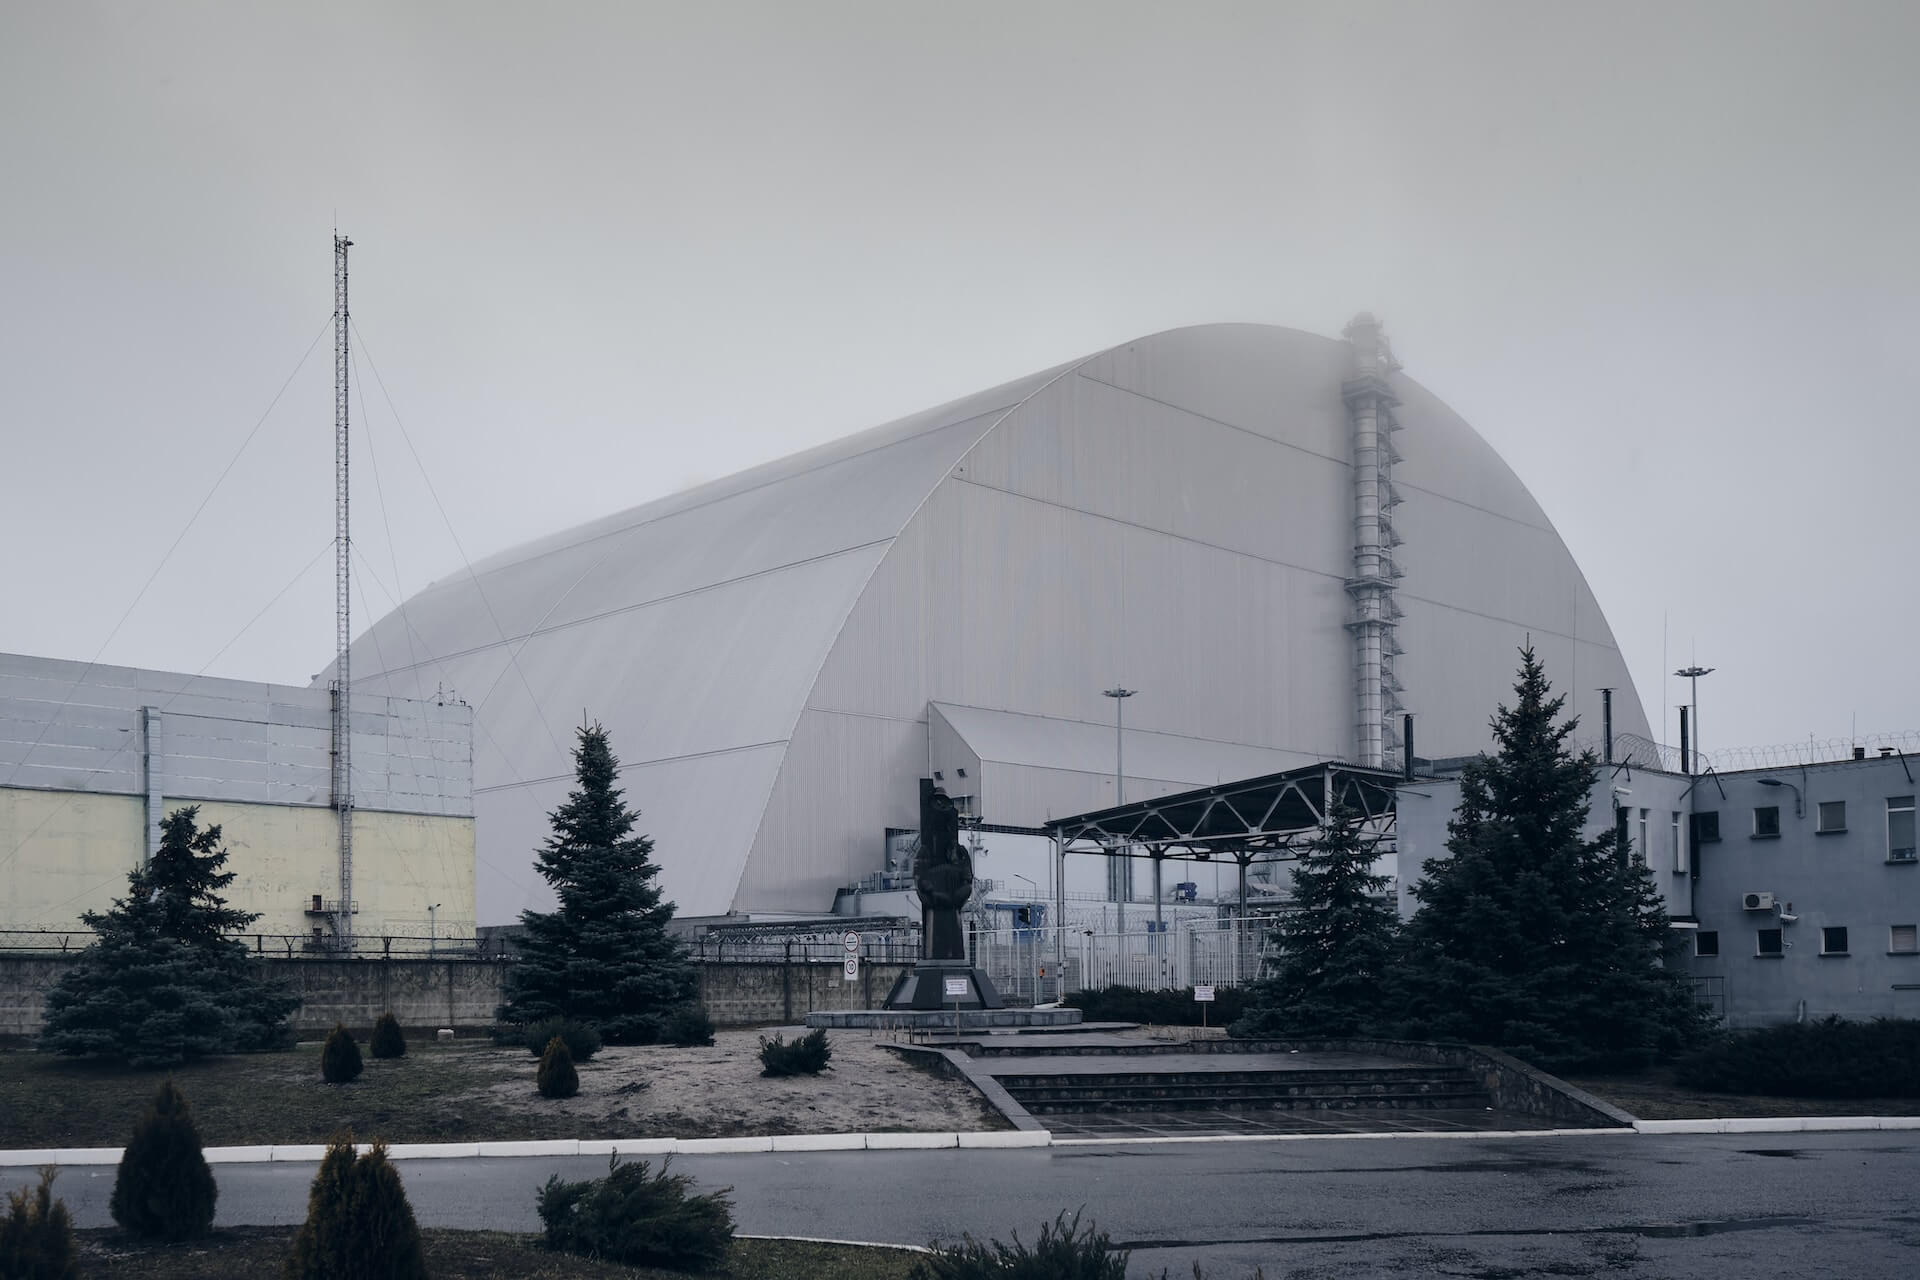 Nuclear reactor 3 at Chernobyl's nuclear power plant.